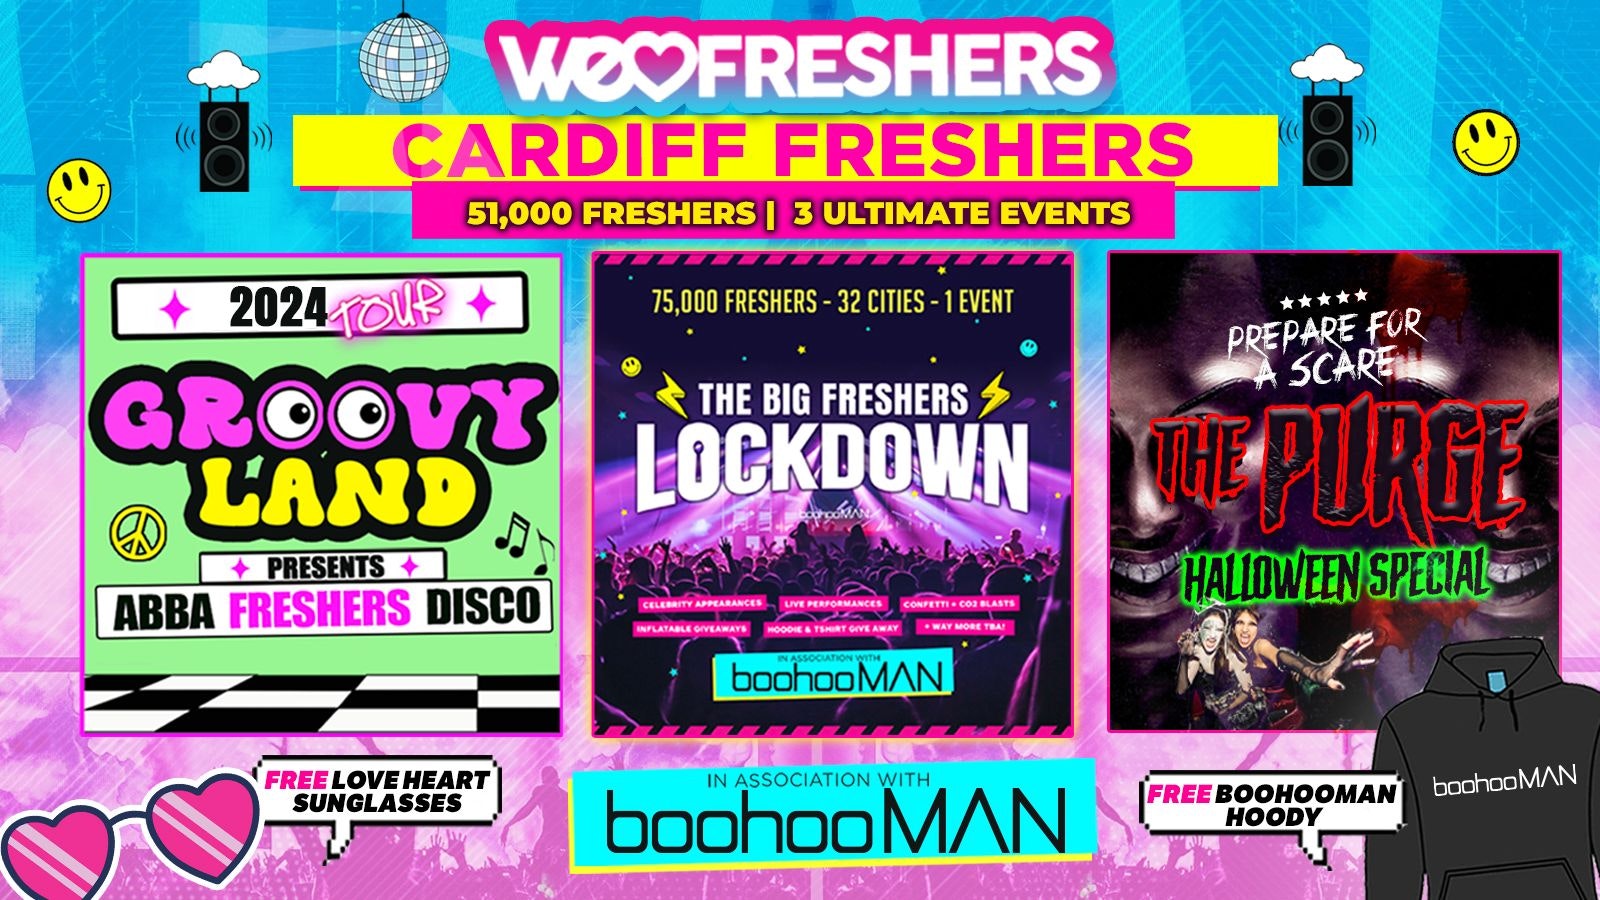 WE LOVE CARDIFF FRESHERS 2024 in association with boohooMAN – 3 EVENTS❗